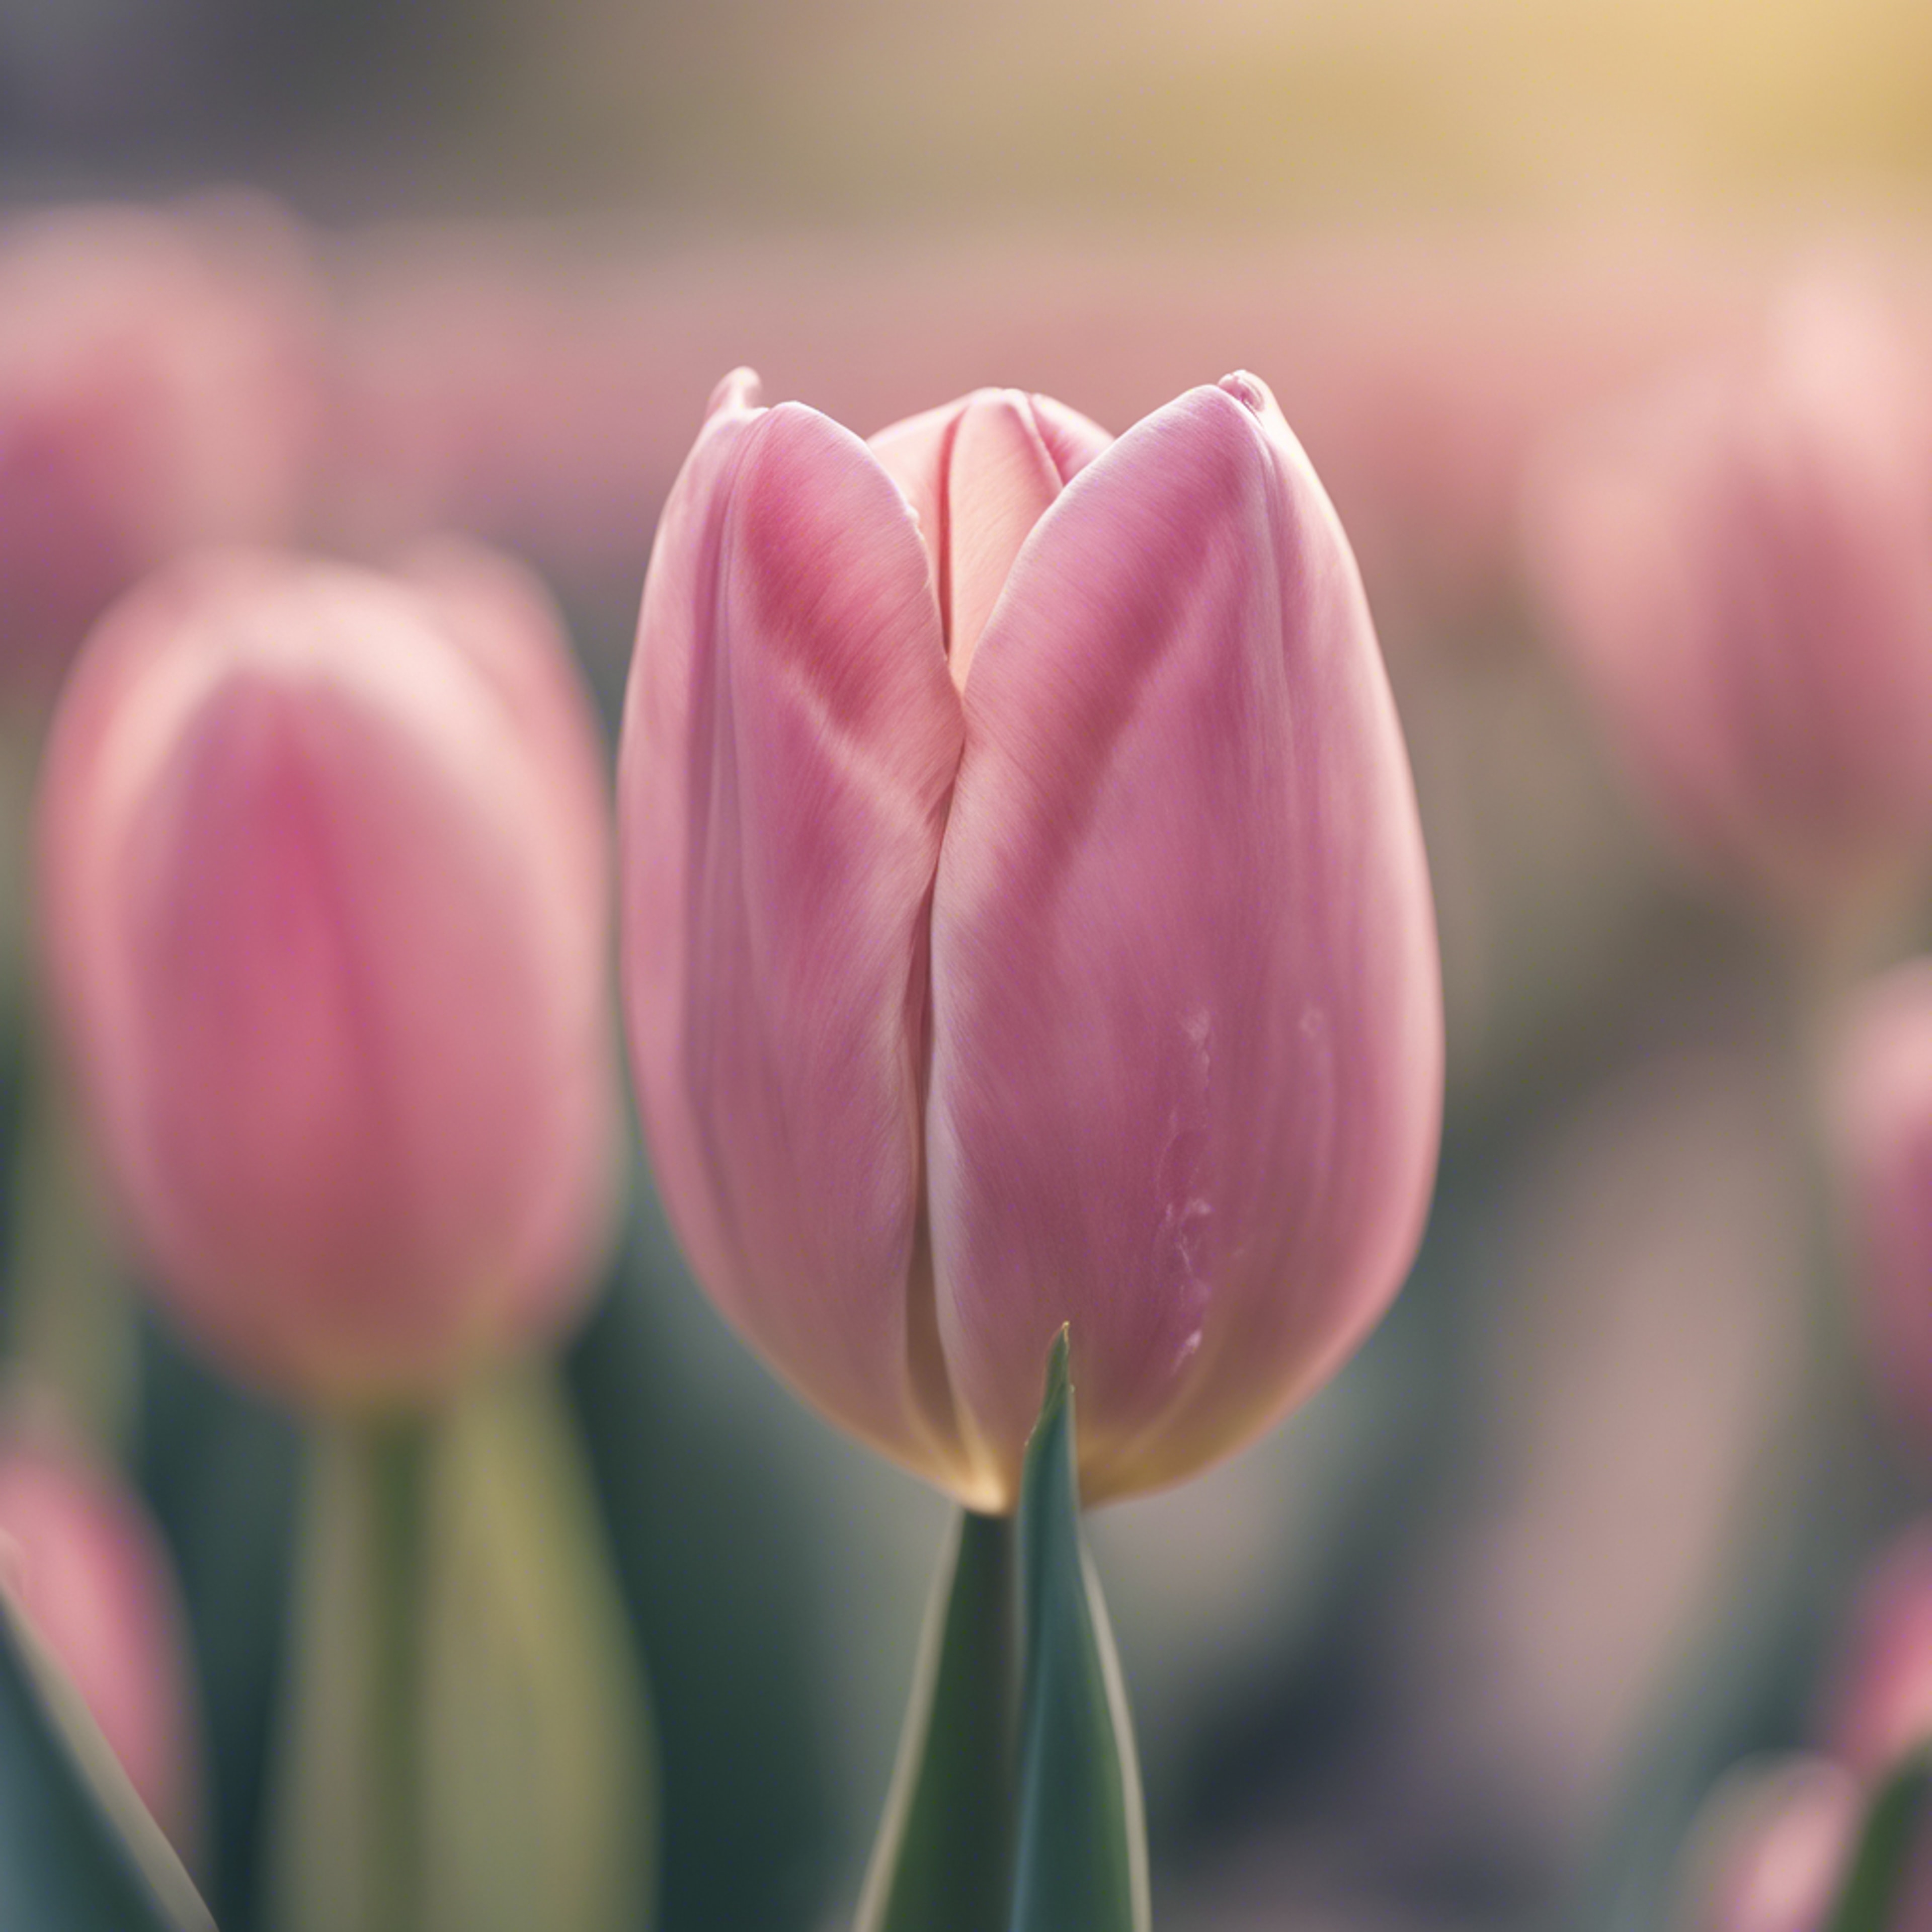 A close-up of a lone pink tulip against a soft and blurry pastel background Fond d'écran[4132f8cb968043e28bd5]